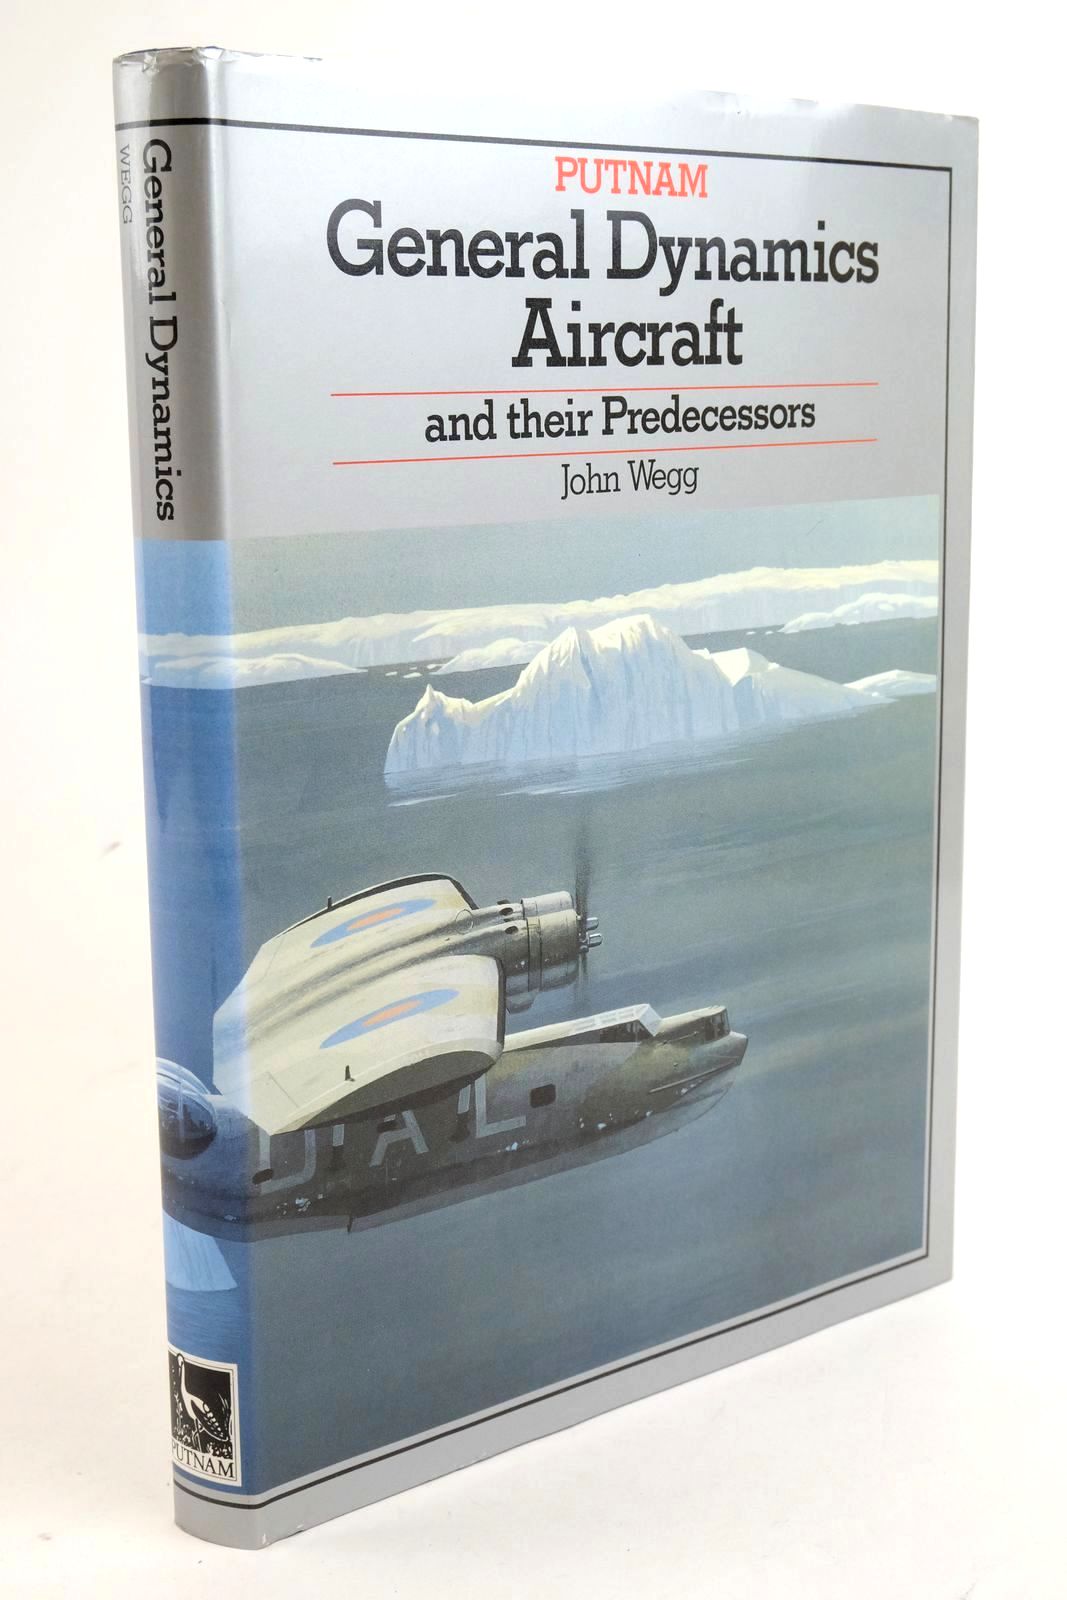 Photo of GENERAL DYNAMICS AIRCRAFT AND THEIR PREDECESSORS written by Wegg, John published by Putnam (STOCK CODE: 1322048)  for sale by Stella & Rose's Books